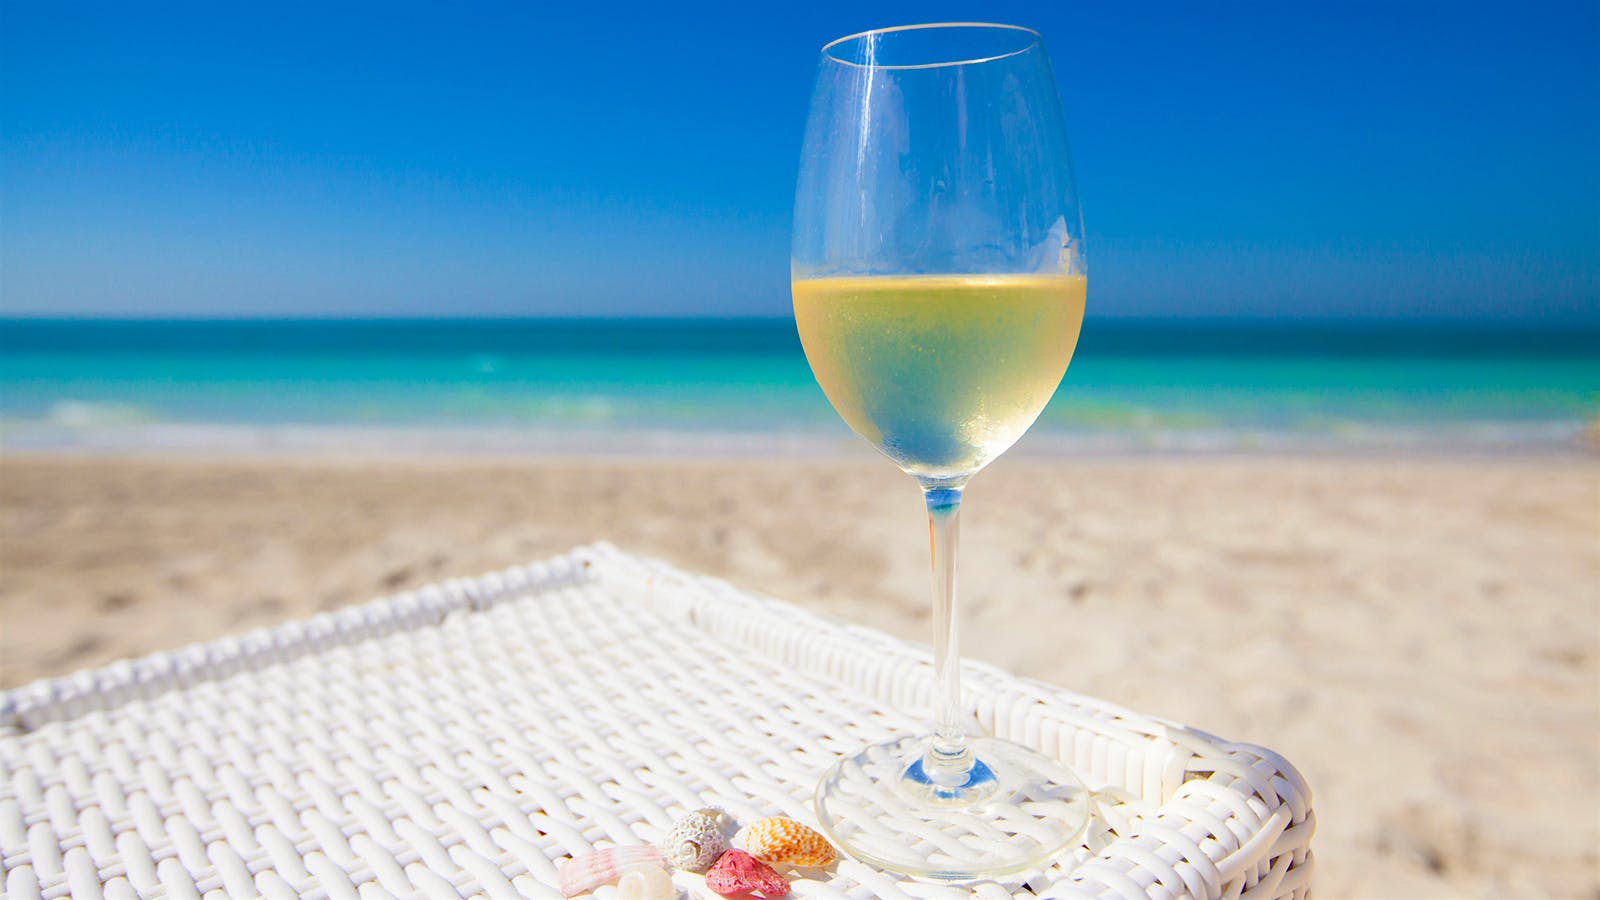 Study Finds a Link Between White Wine and Melanoma